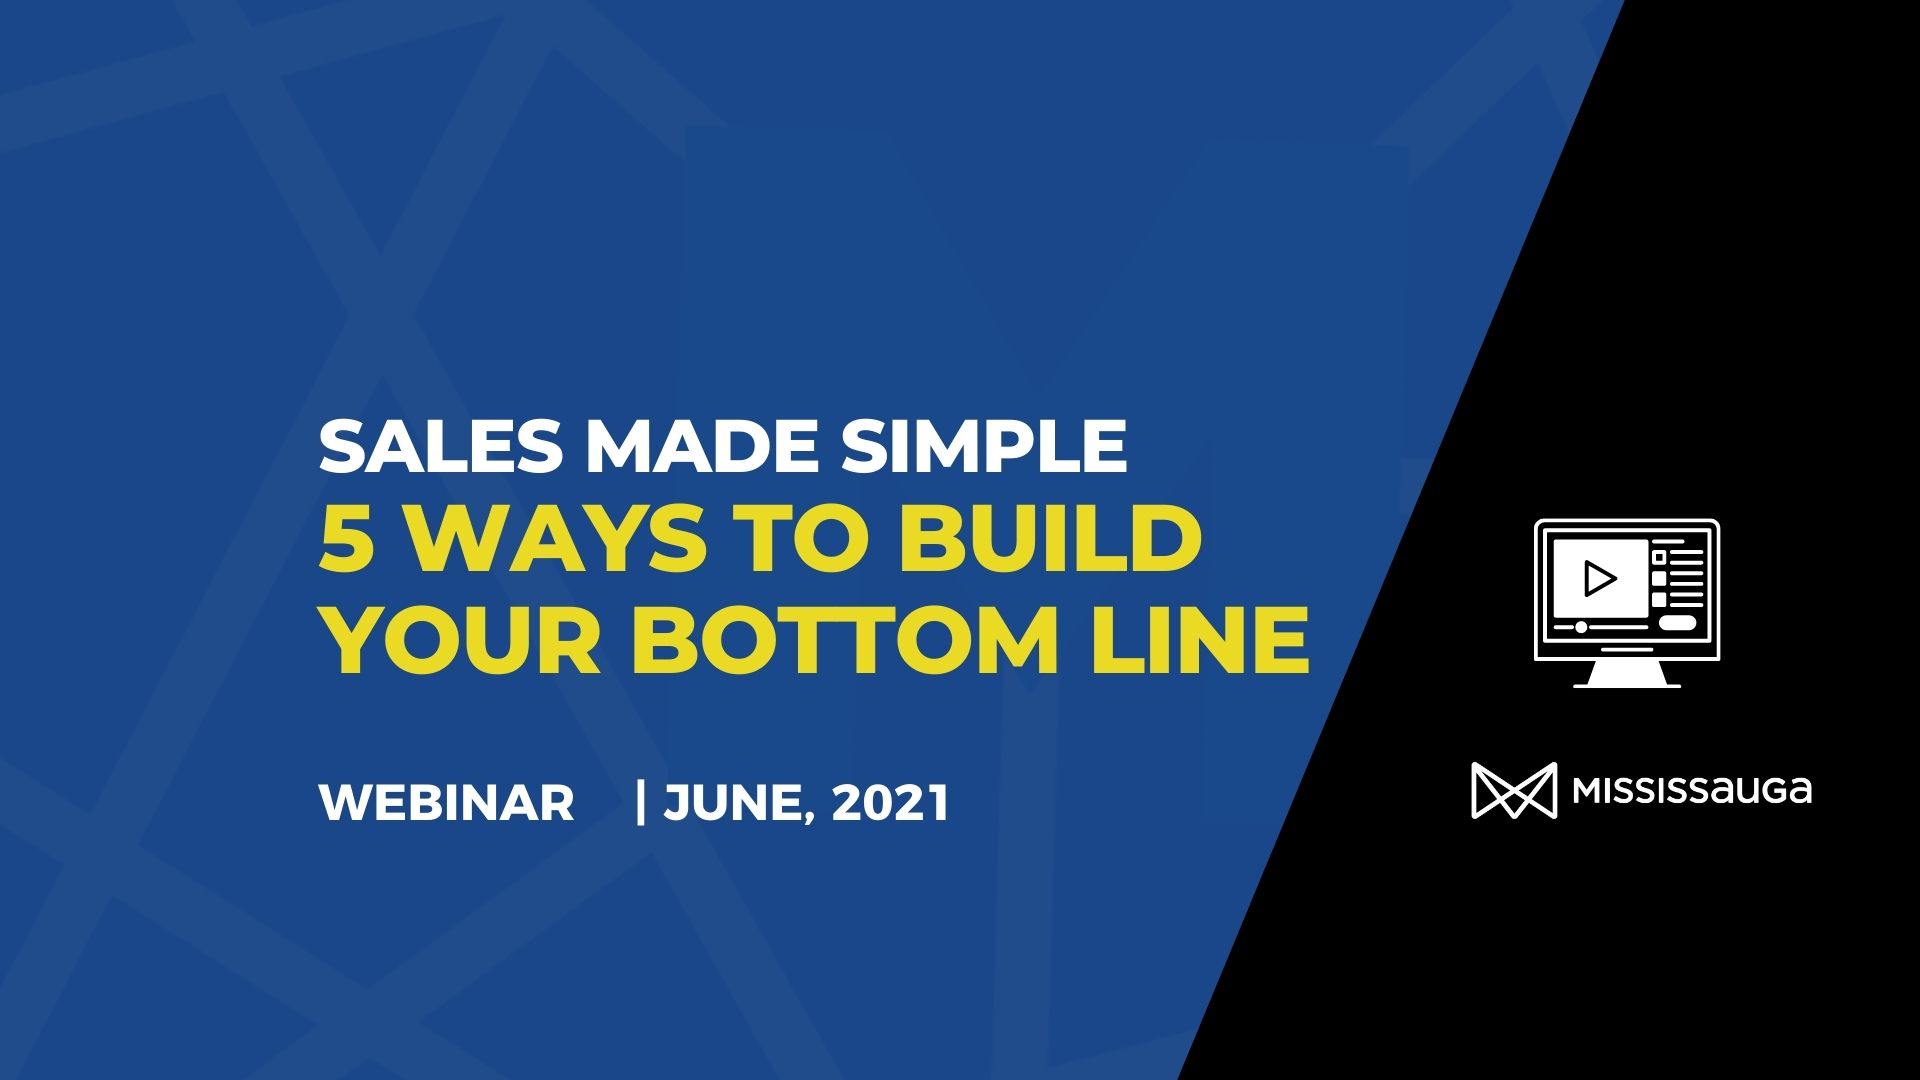 You are currently viewing Sales Made Simple, 5 Ways to Build your Bottom Line – Webinar, June 30